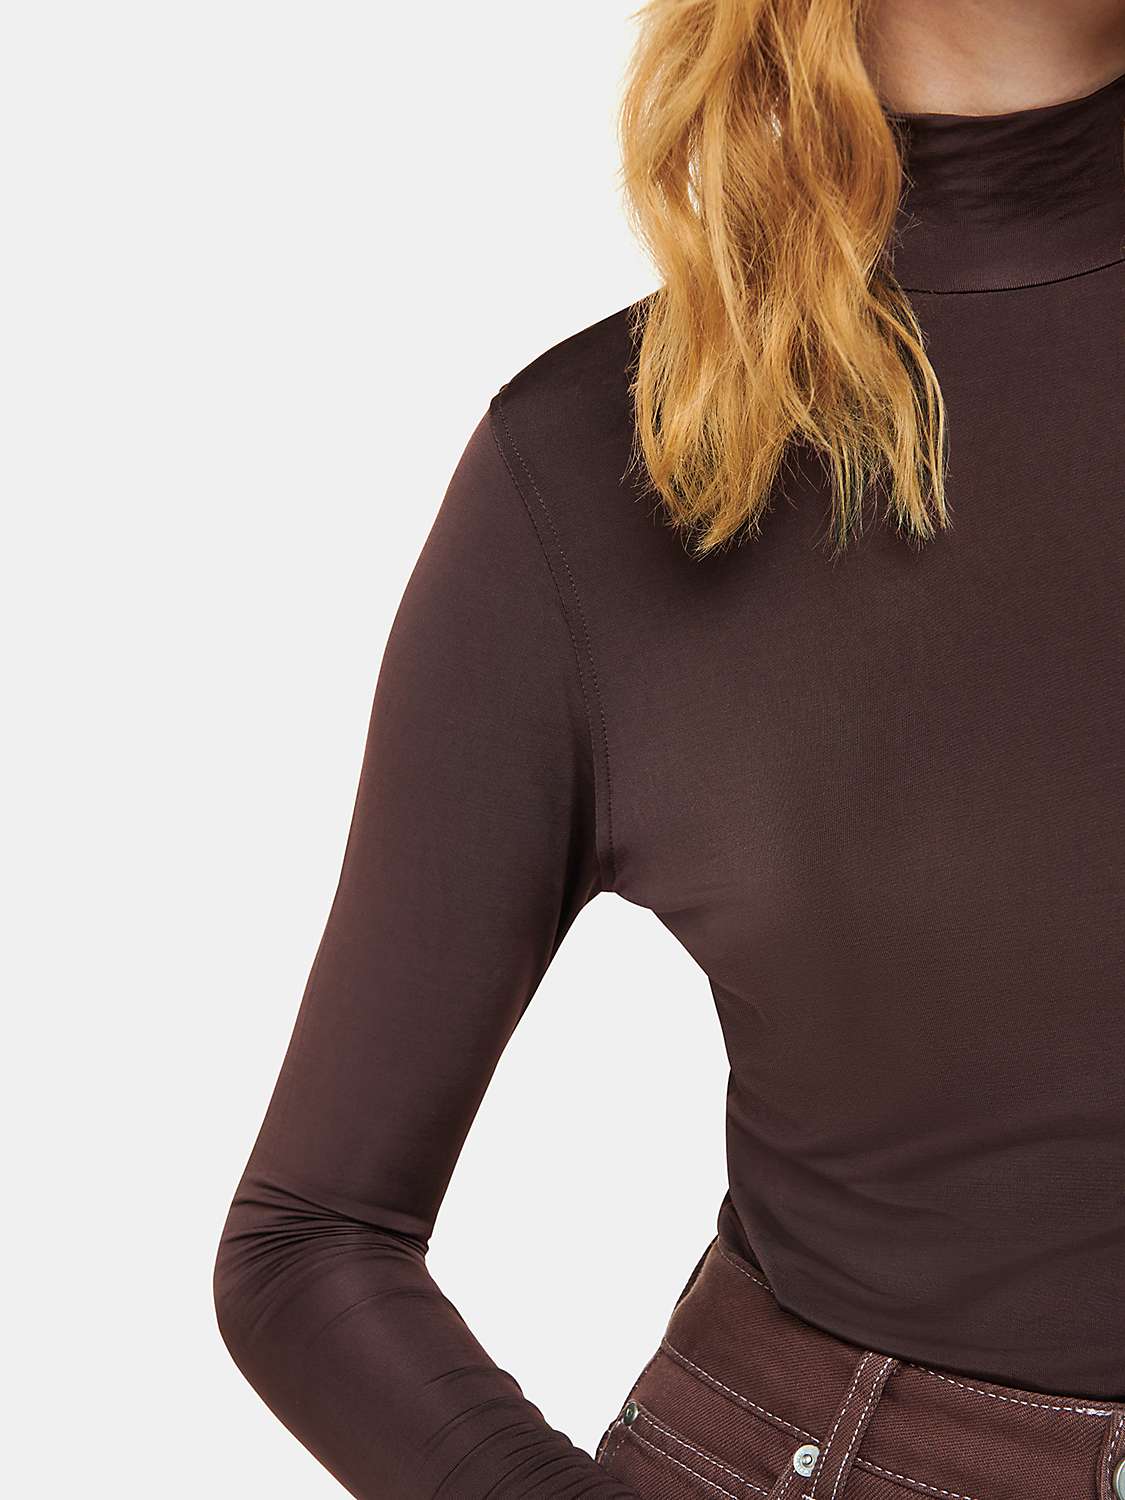 Buy Whistles Slinky High Neck Top Online at johnlewis.com